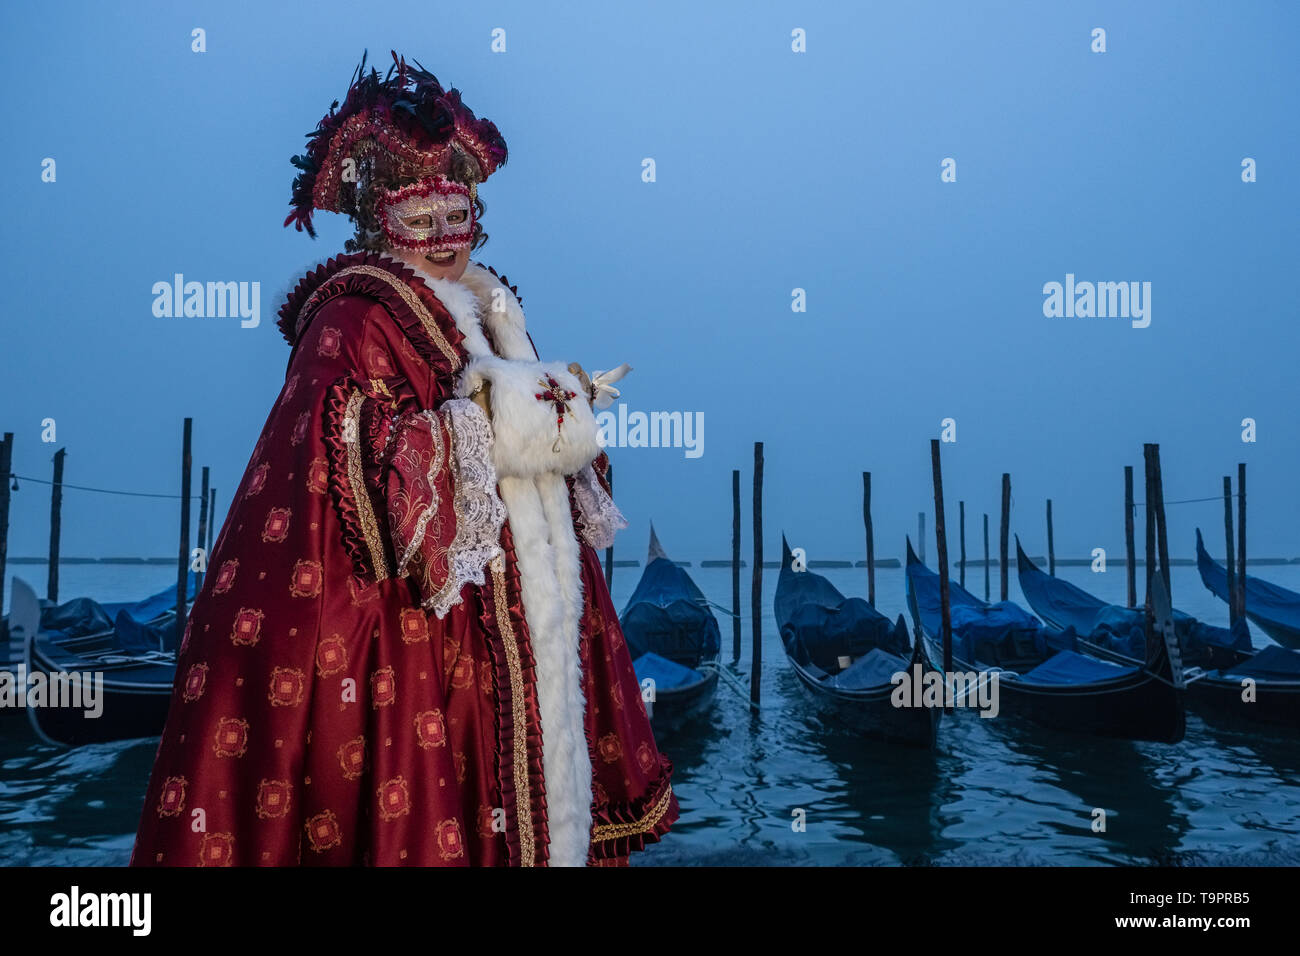 Portrait of a feminin masked person in a beautiful creative costume, posing at Grand Canal, Canal Grande, celebrating the Venetian Carnival Stock Photo